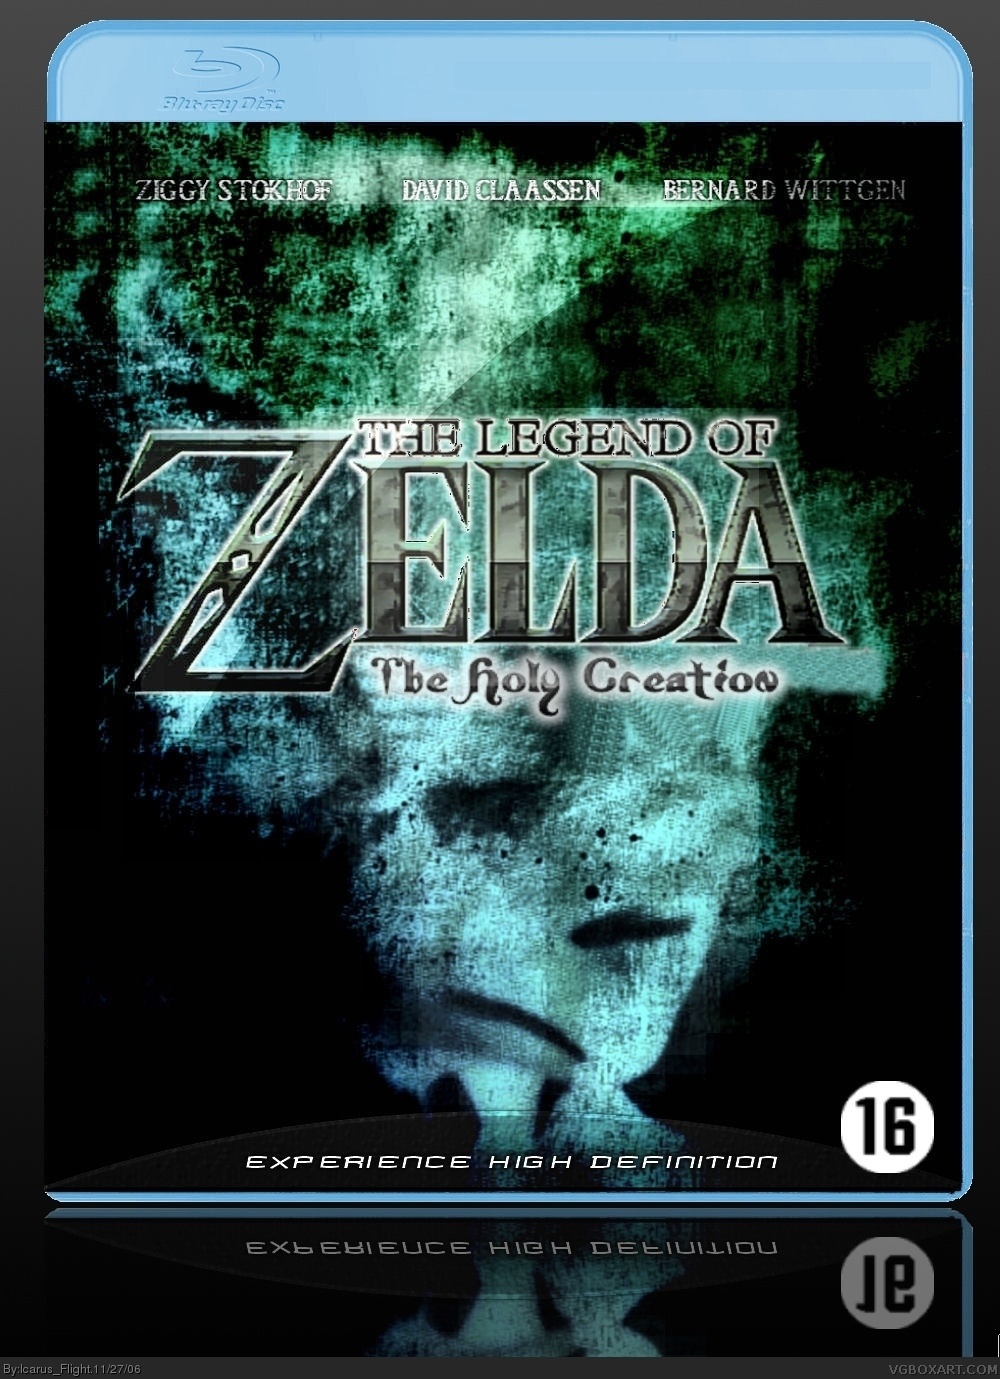 The Legend of Zelda: The Holy Creation box cover